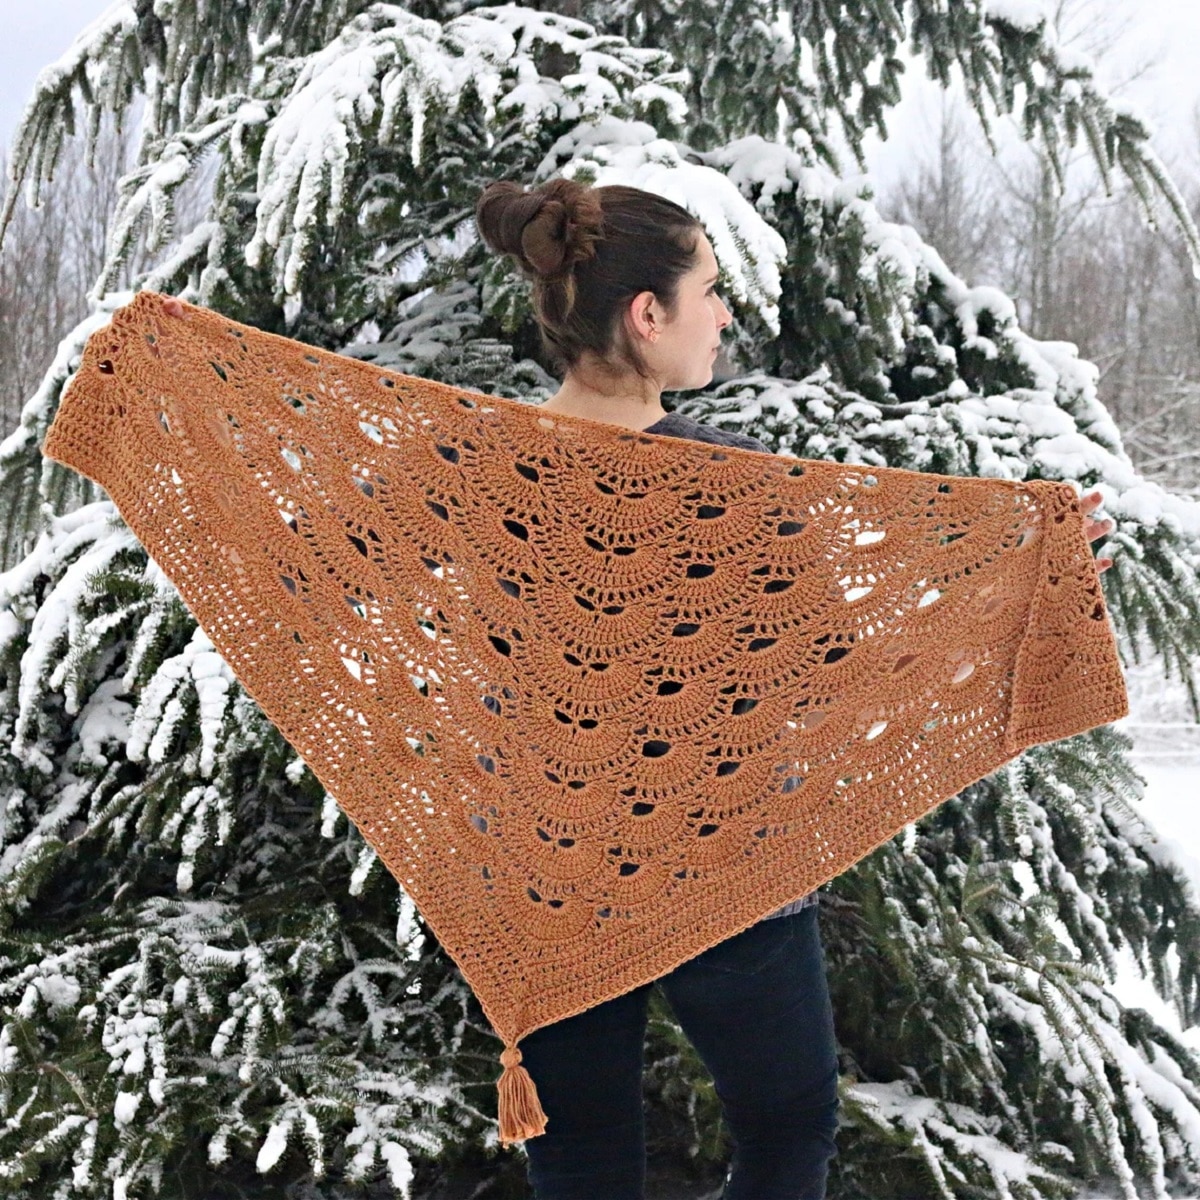 Brunette woman standing by a snowy tree with an orange crochet shawl and a large orange tassel hanging at the bottom.